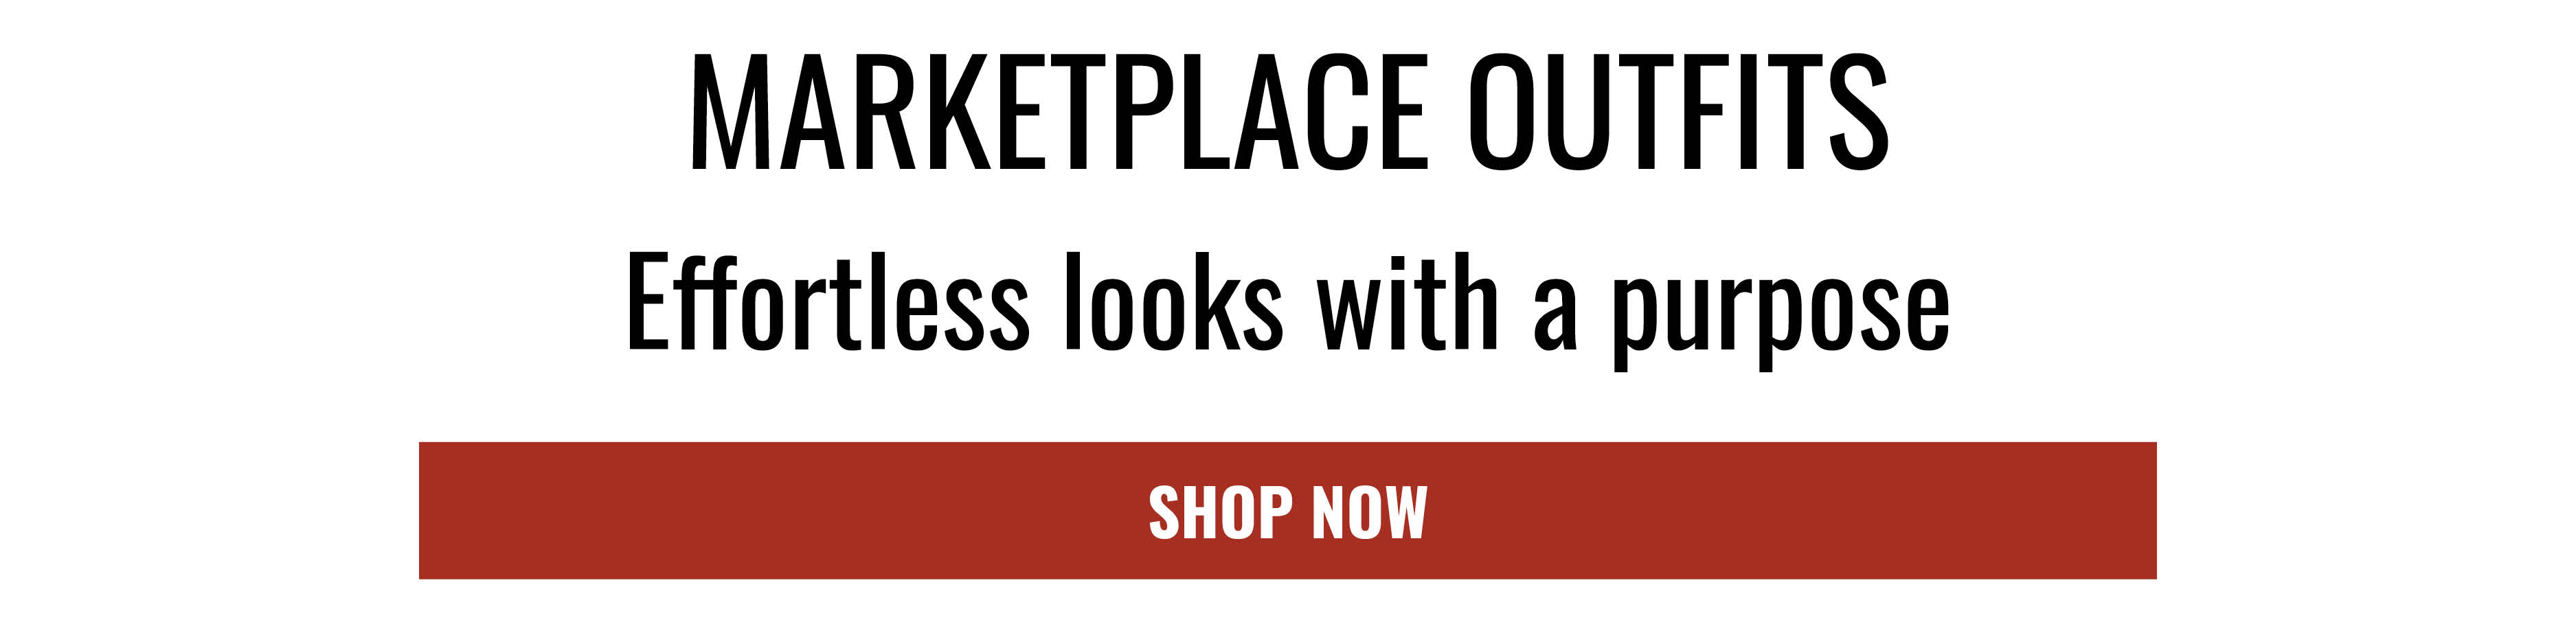 MARKETPLACE OUTFITS Effortless looks with a purpose SHOP NOW